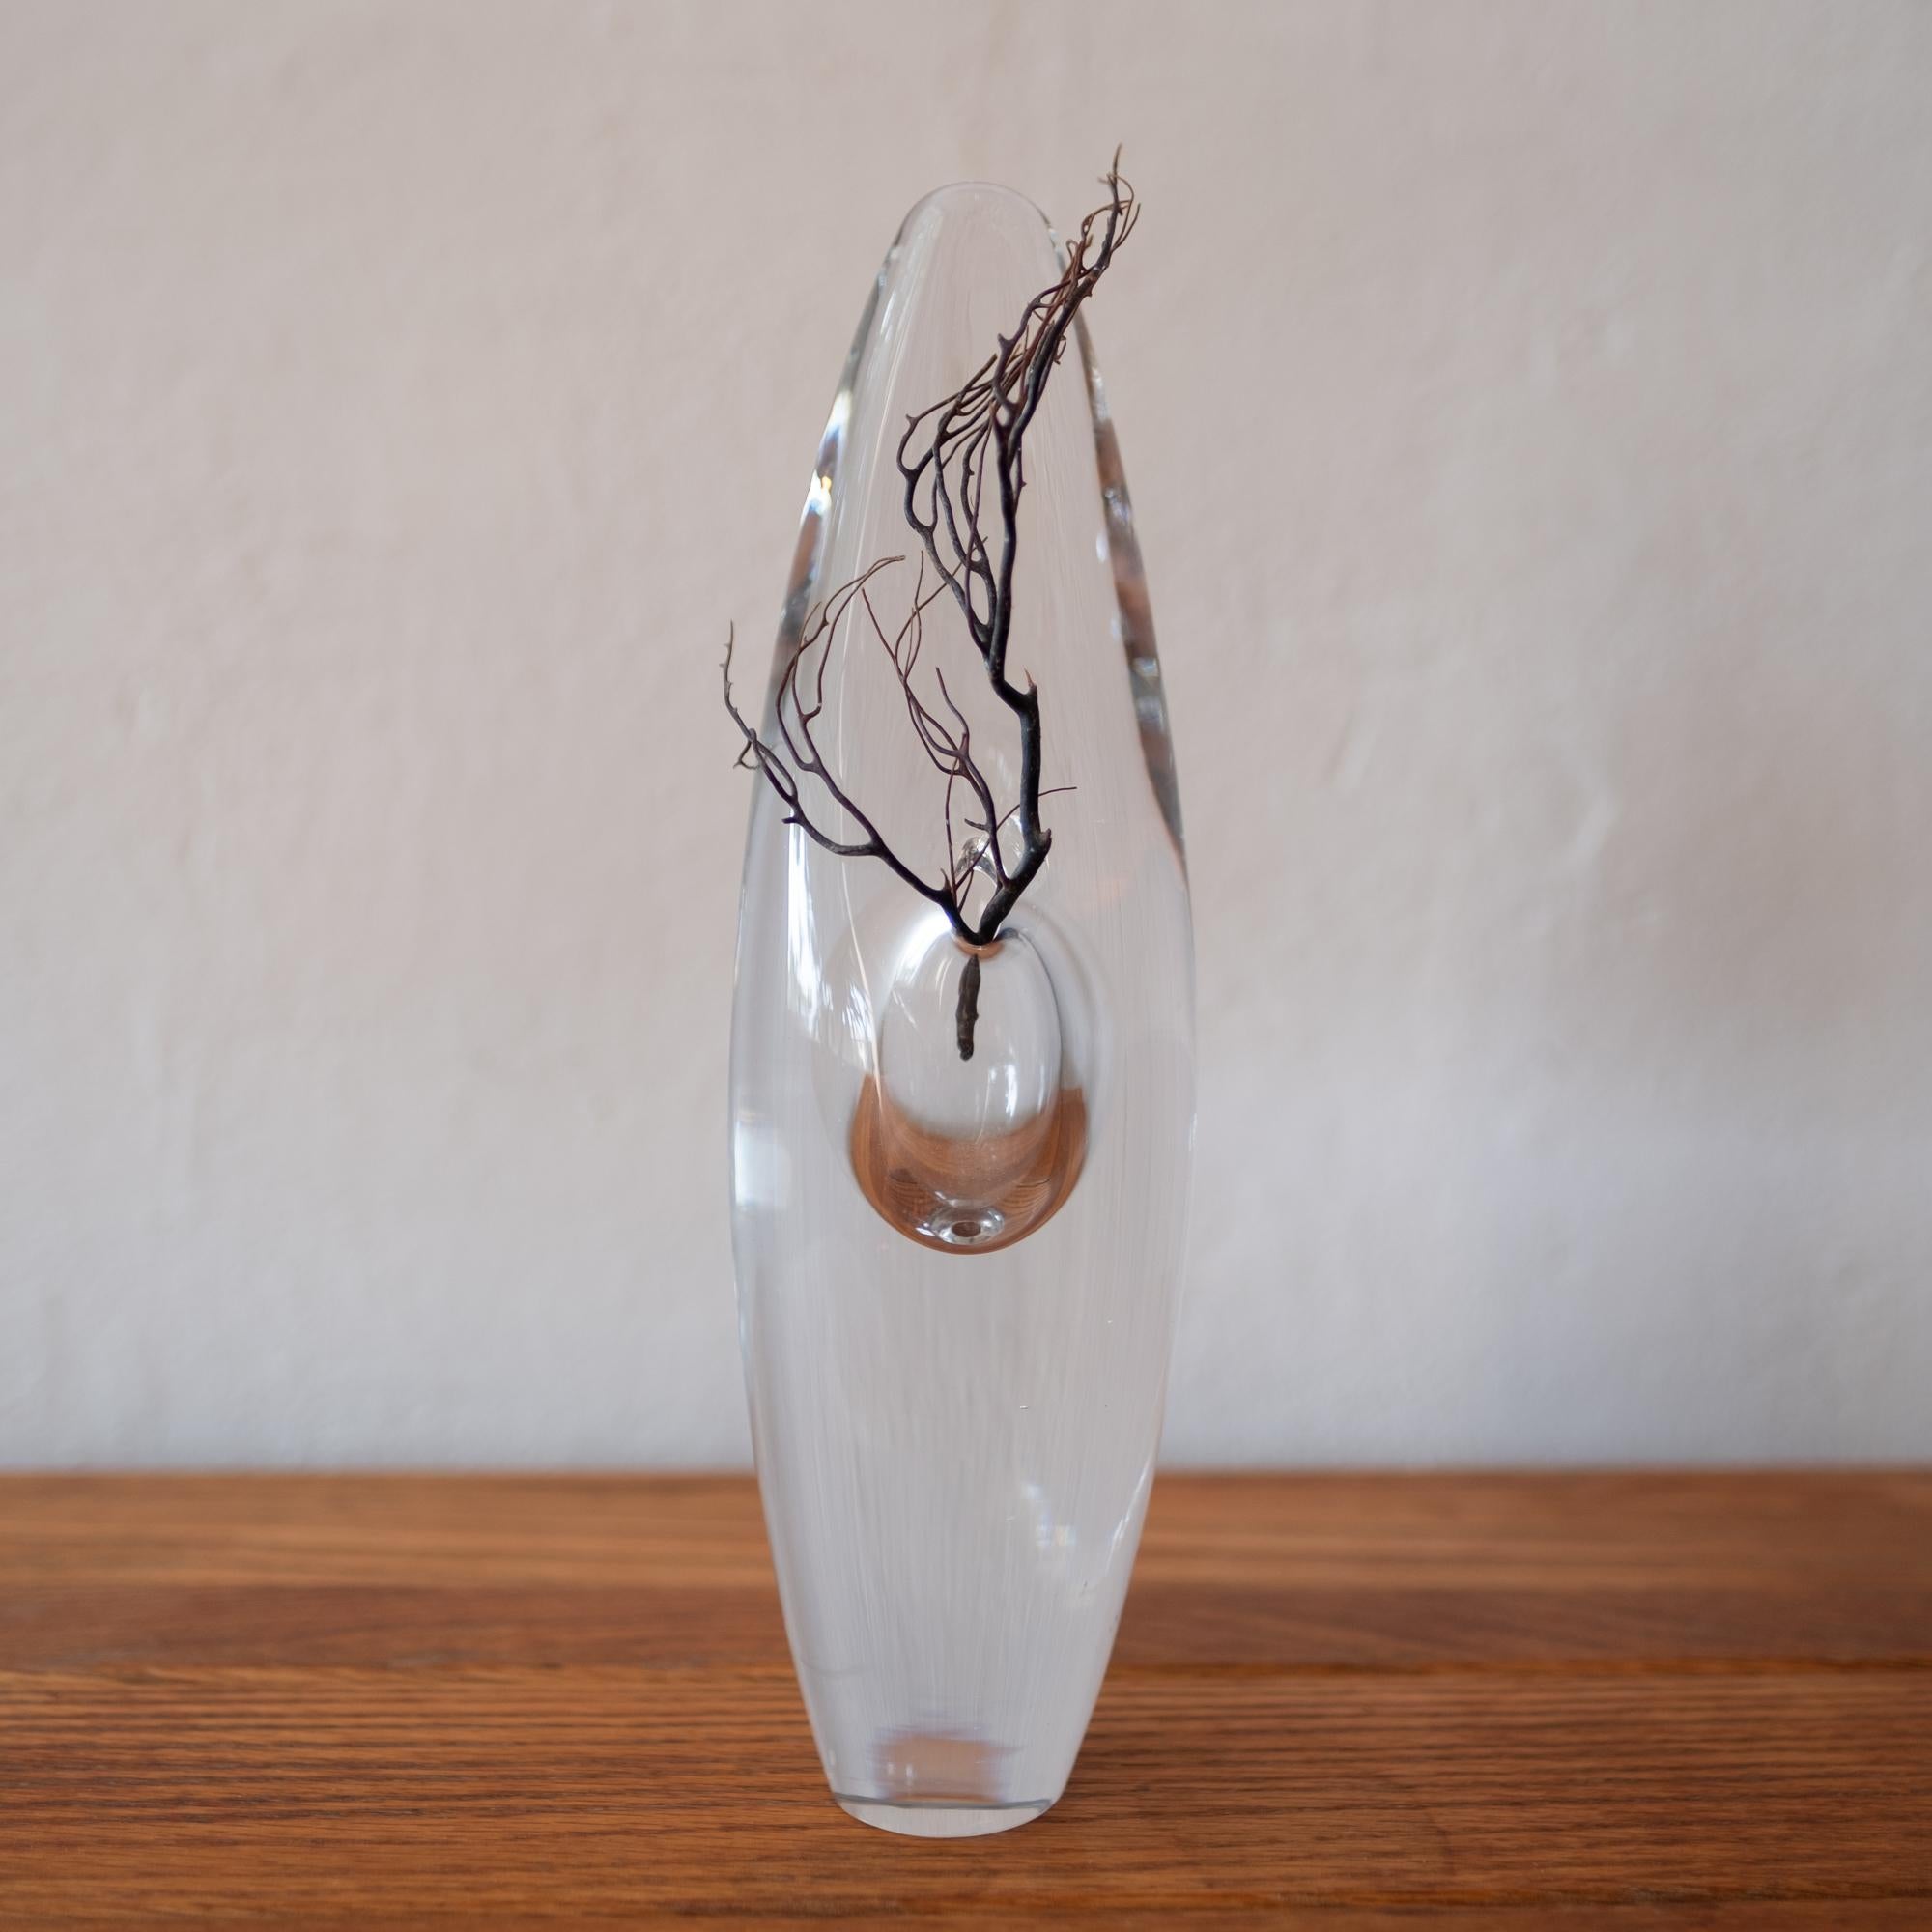 'Orkidea' glass sculpture vase by Timo Sarpaneva for Iittala. Clear lead crystal glass, steam blown, cut and surface polished. Designed in 1953. Signed.
   